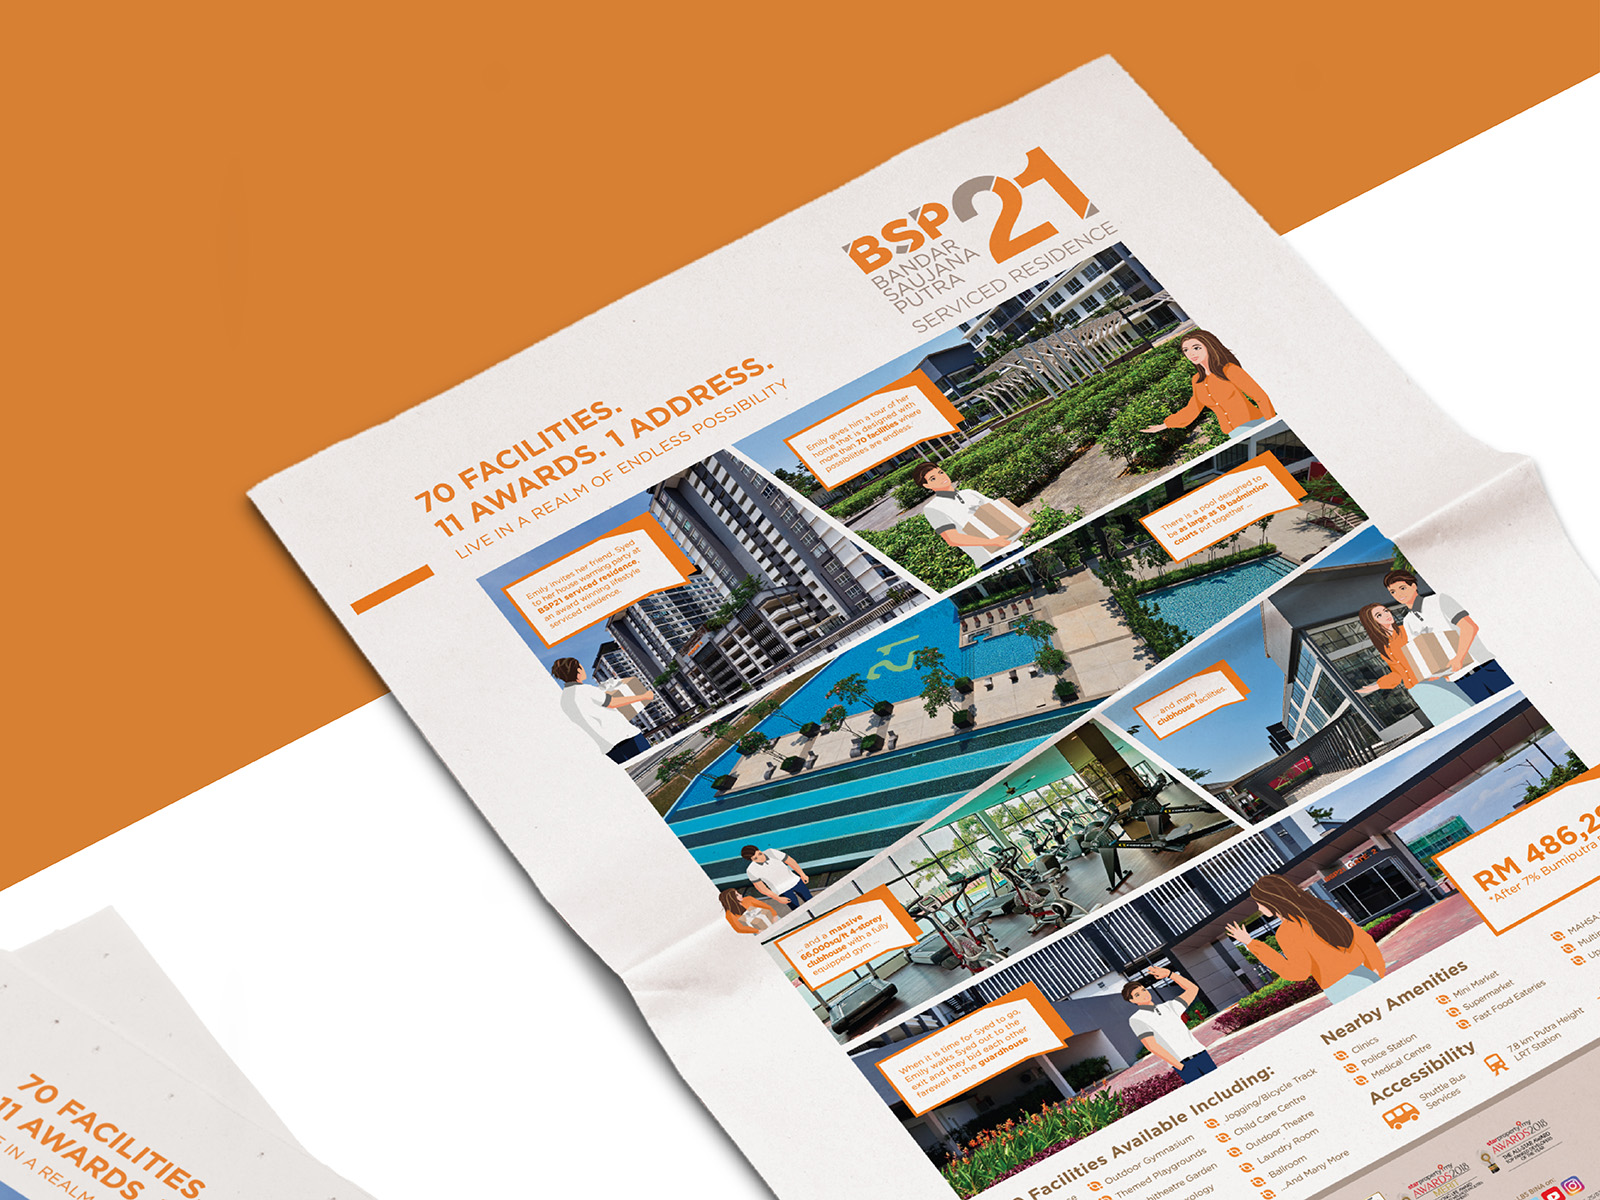 LBS Bina Group BSP21 key visual development for press ad in comic strip style that introduces the property and facilities which is bold and different and captures the attention of the readers